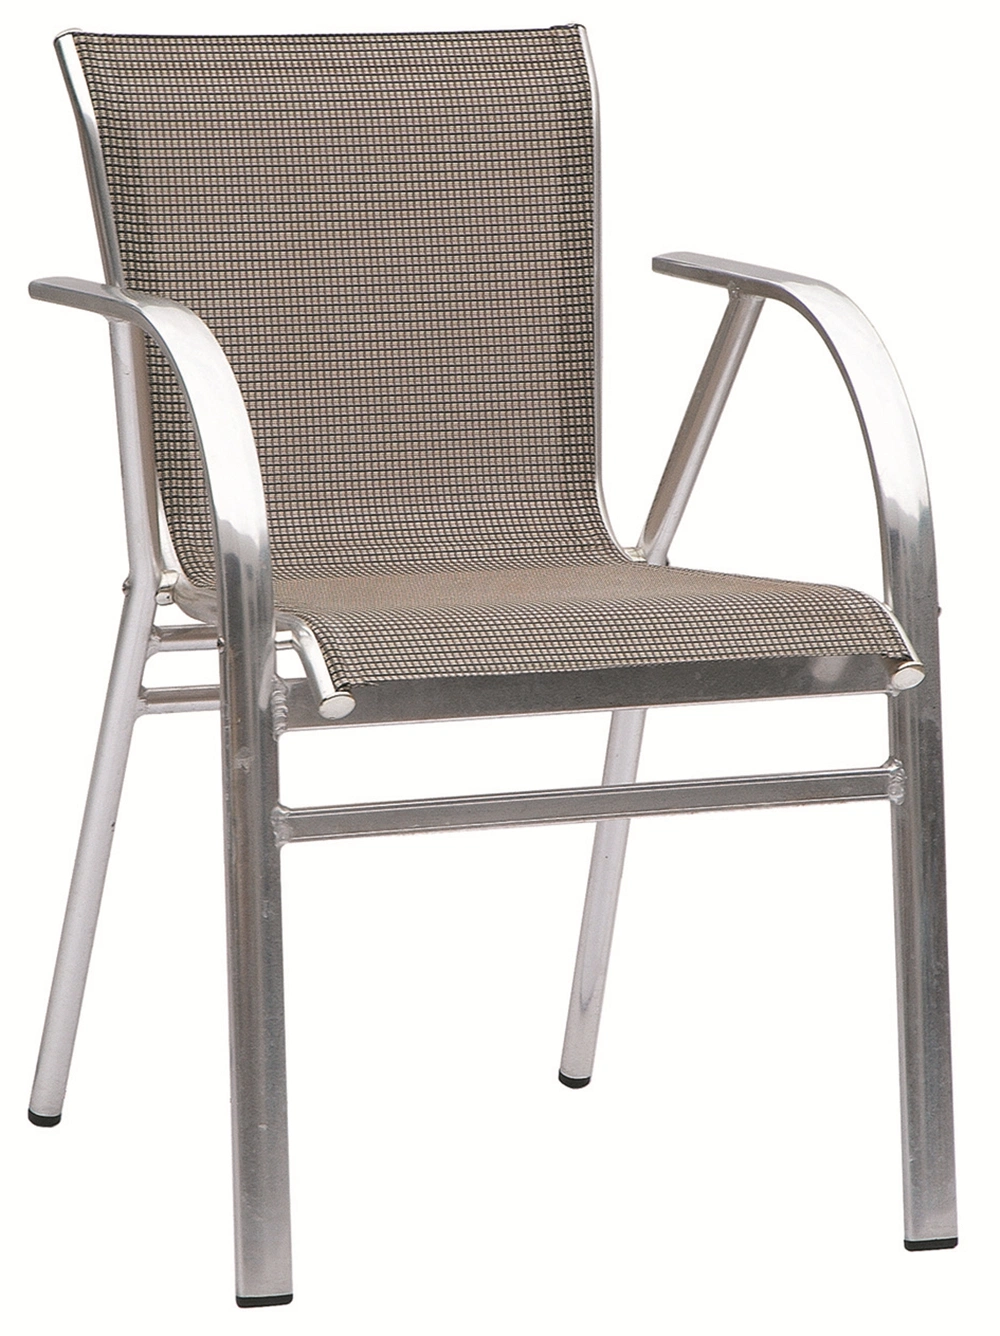 Round Rattan Normal Weaving Shiny Frame Stackable Restaurant Catering Chair